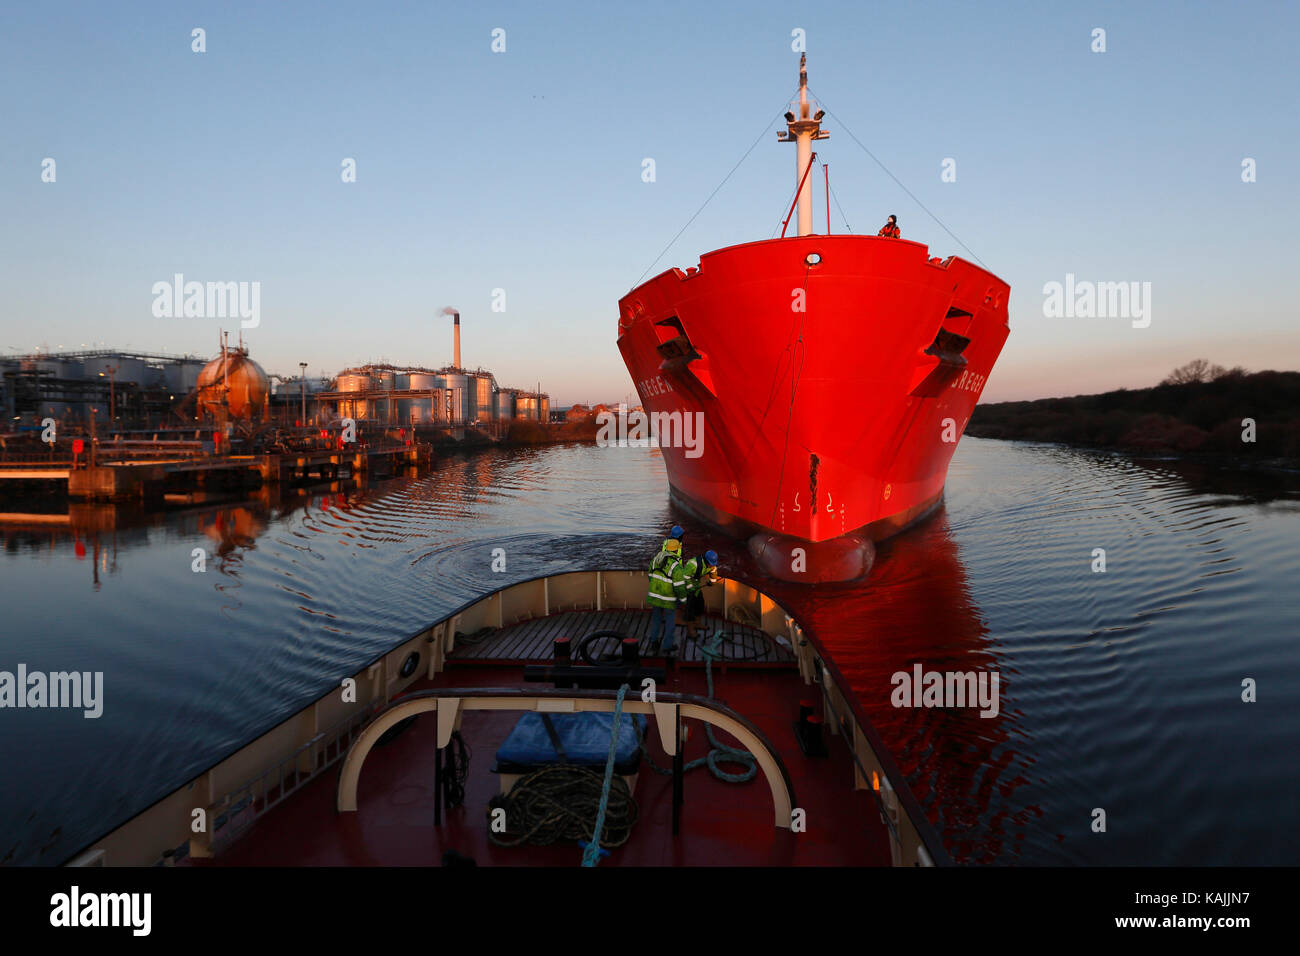 'Bregen' on the Manchester Ship Canal in NE England on April 2, 2013. Stock Photo